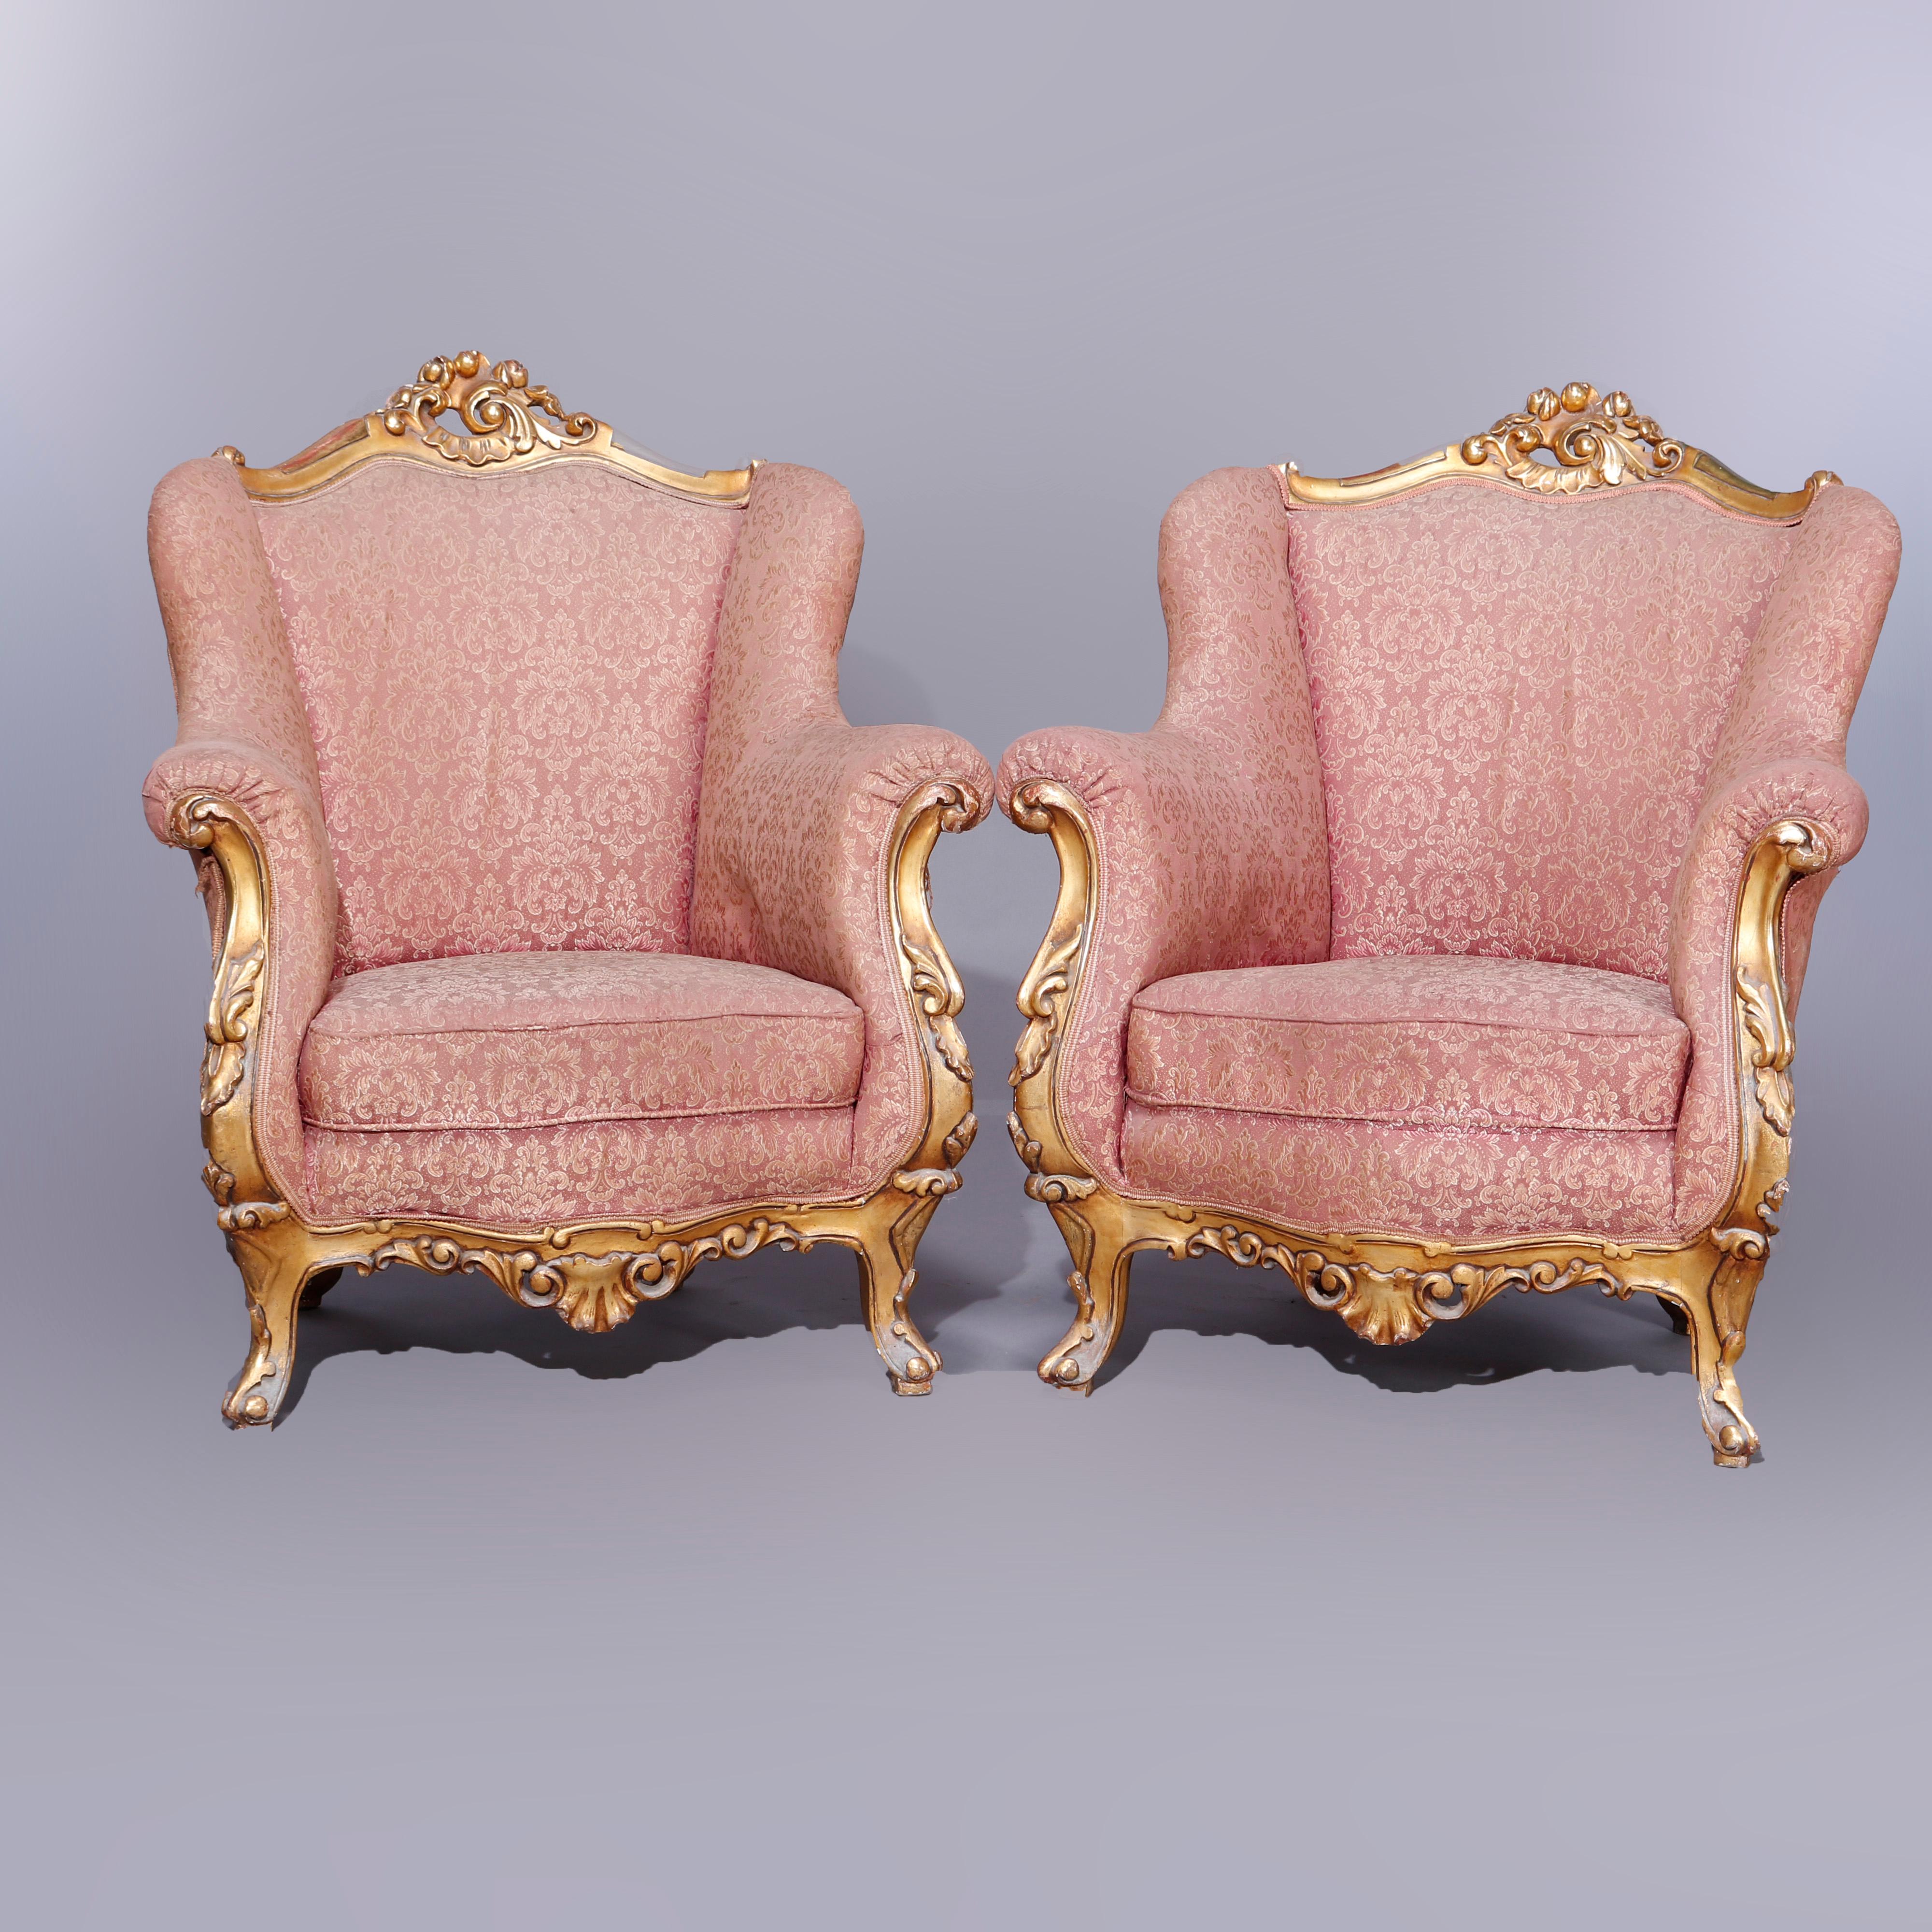 Carved Pair Antique French Louis XIV Gilt Wood Upholstered Wing Back Chairs, Circa 1910